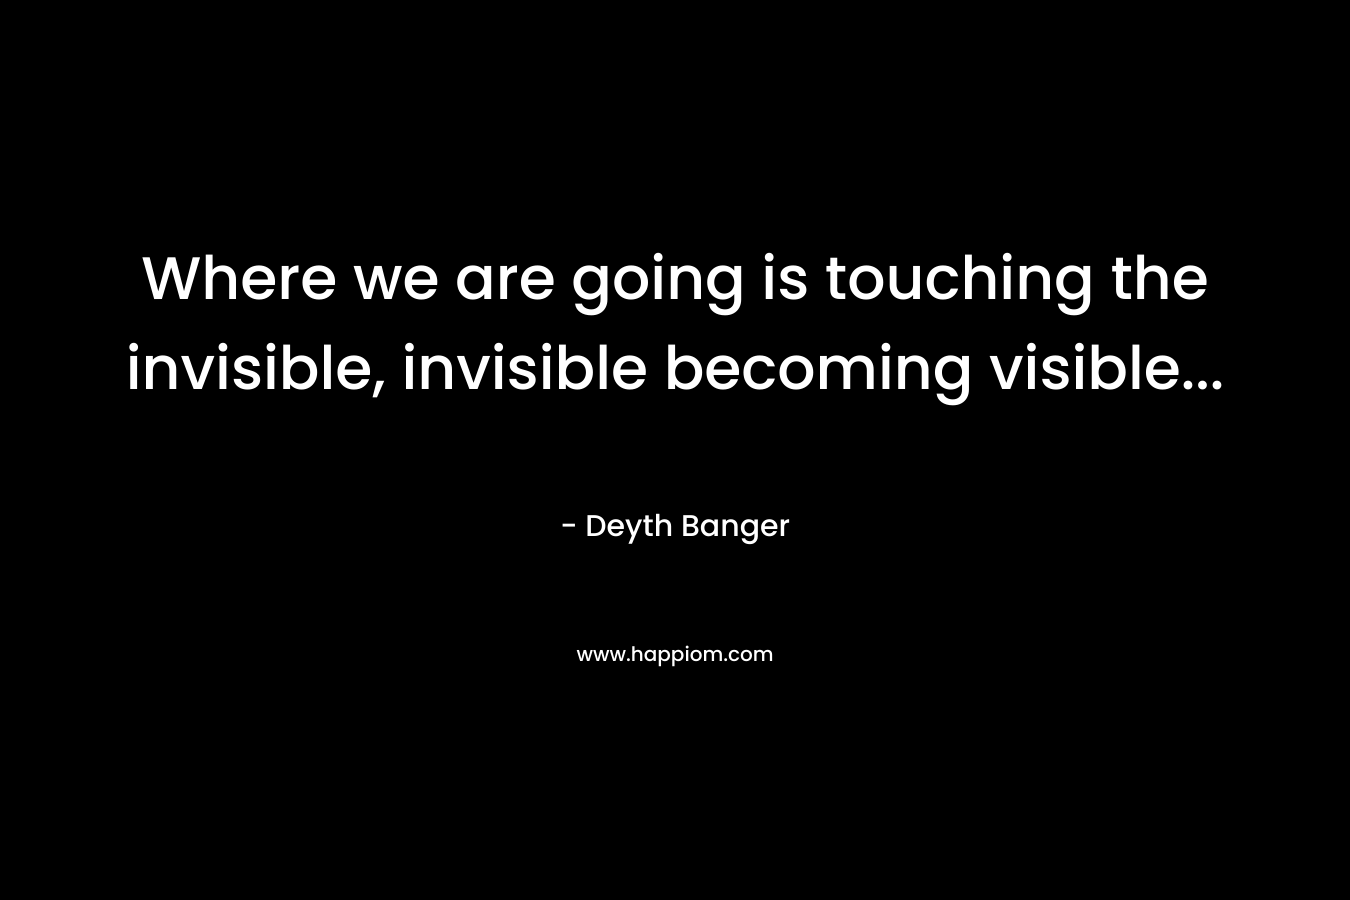 Where we are going is touching the invisible, invisible becoming visible...